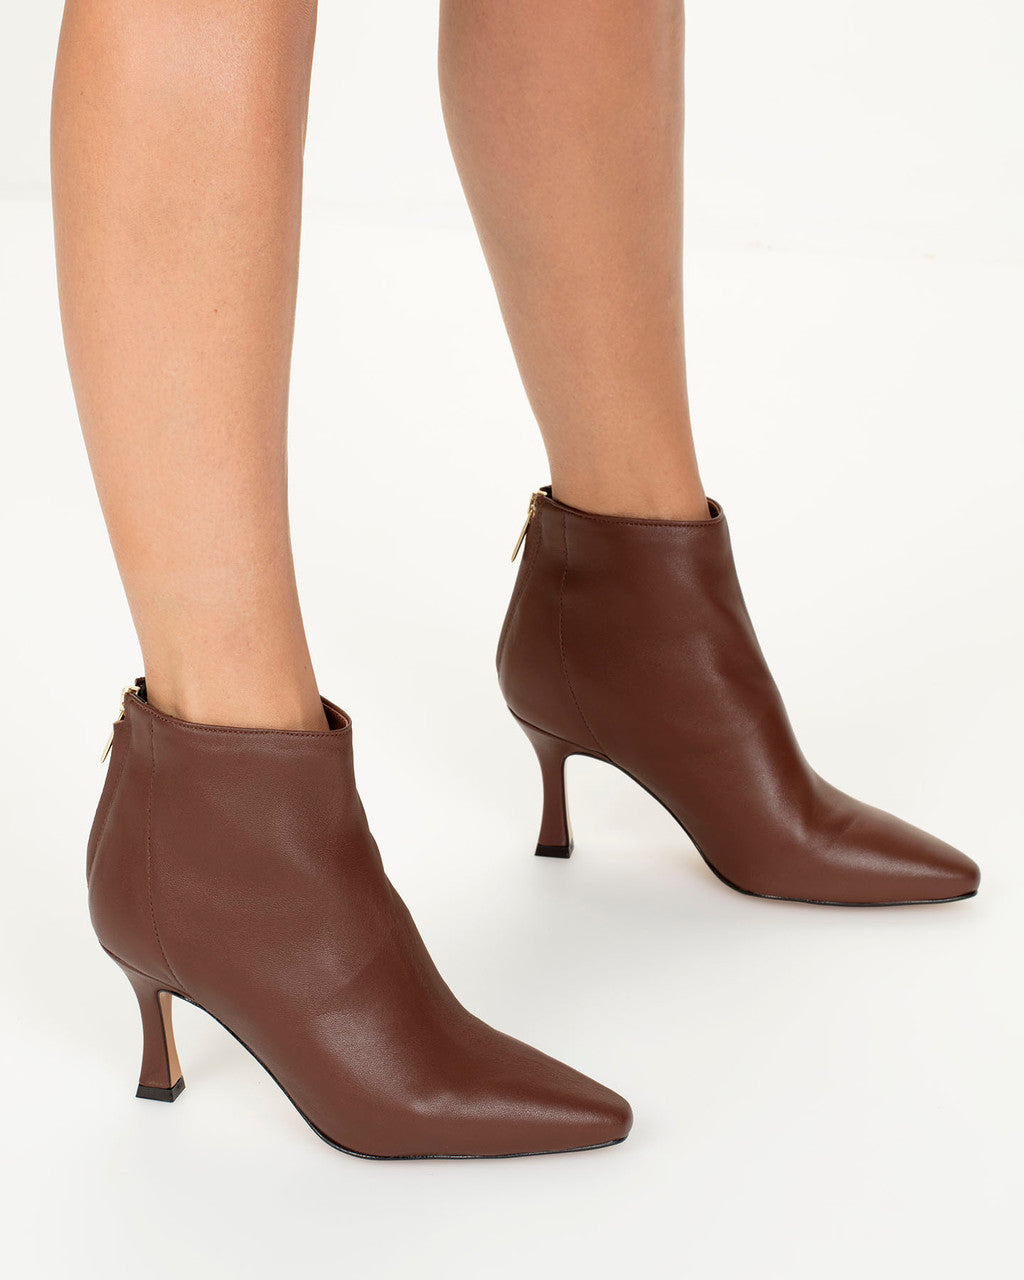 Bianca Buccheri Lupo Brown Ankle Boot